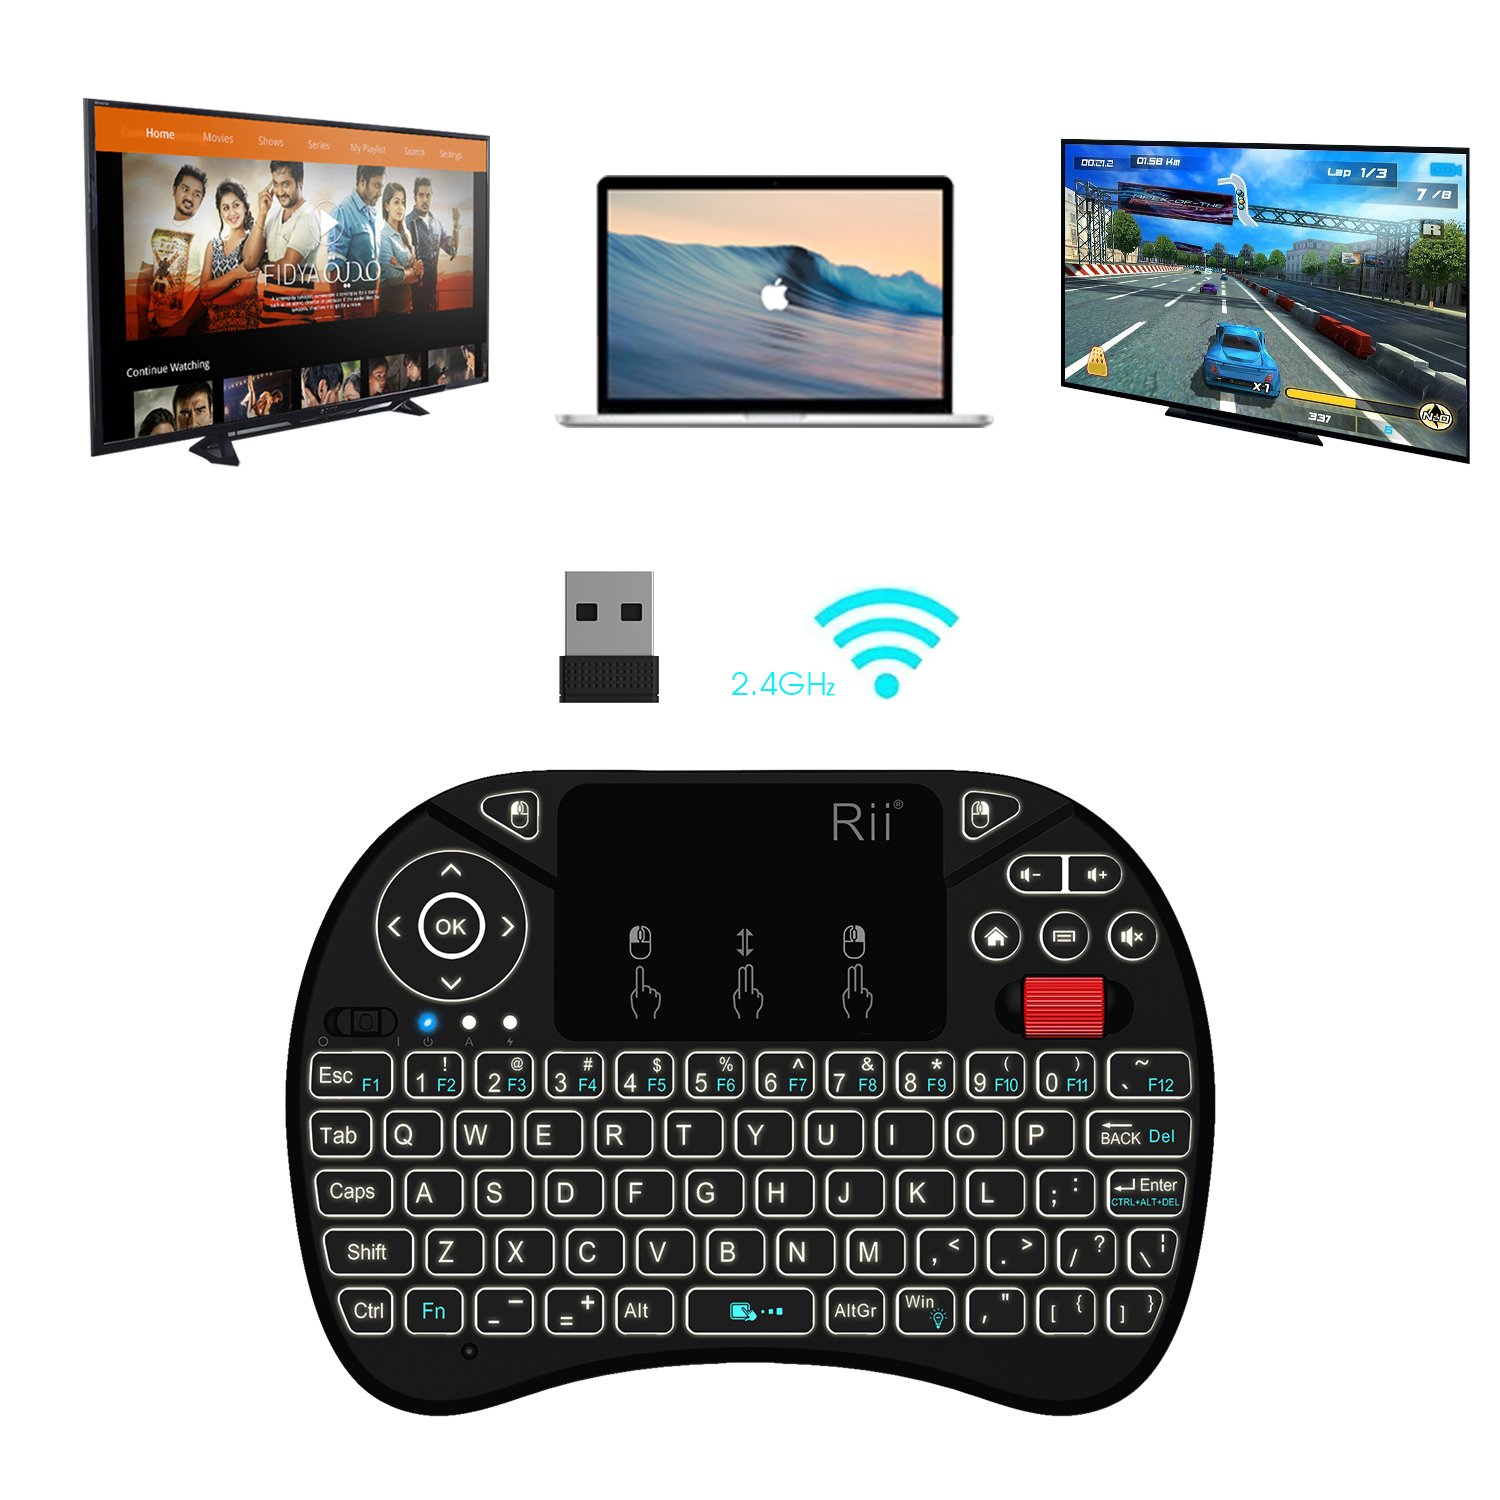 Rii Mini Wireless Keyboard, i8X Portable 2.4GHz Wireless Keyboard with Touchpad Mouse, LED Backlit, Rechargable Li-ion Battery-Black